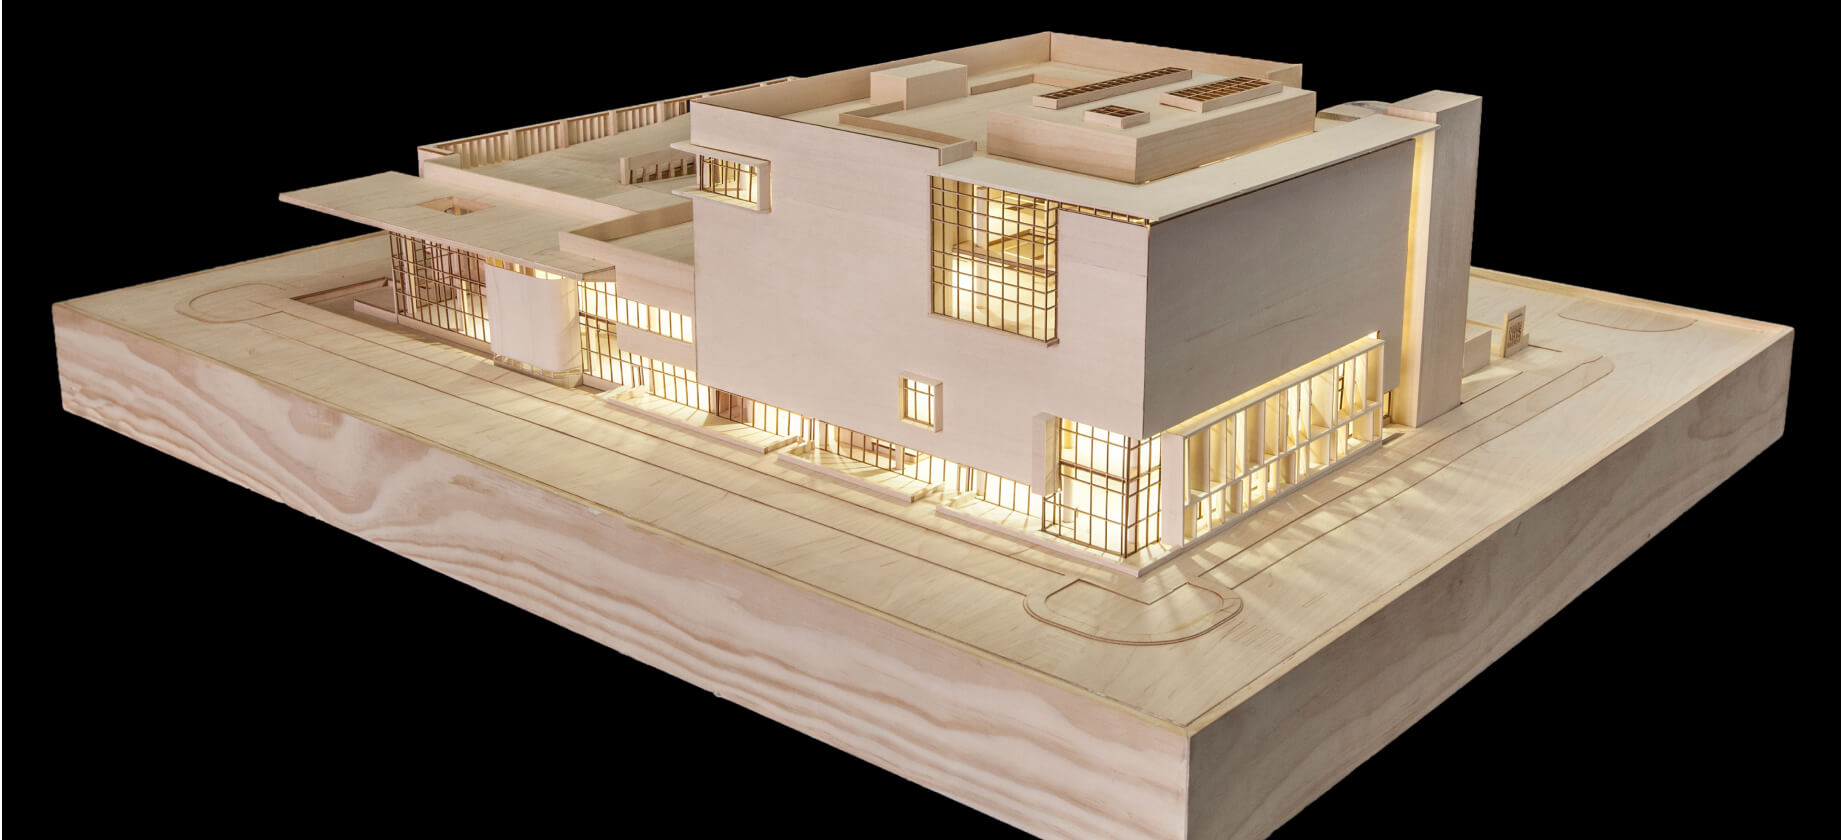 Architectural model of the Museum of the American Arts & Craft Movement